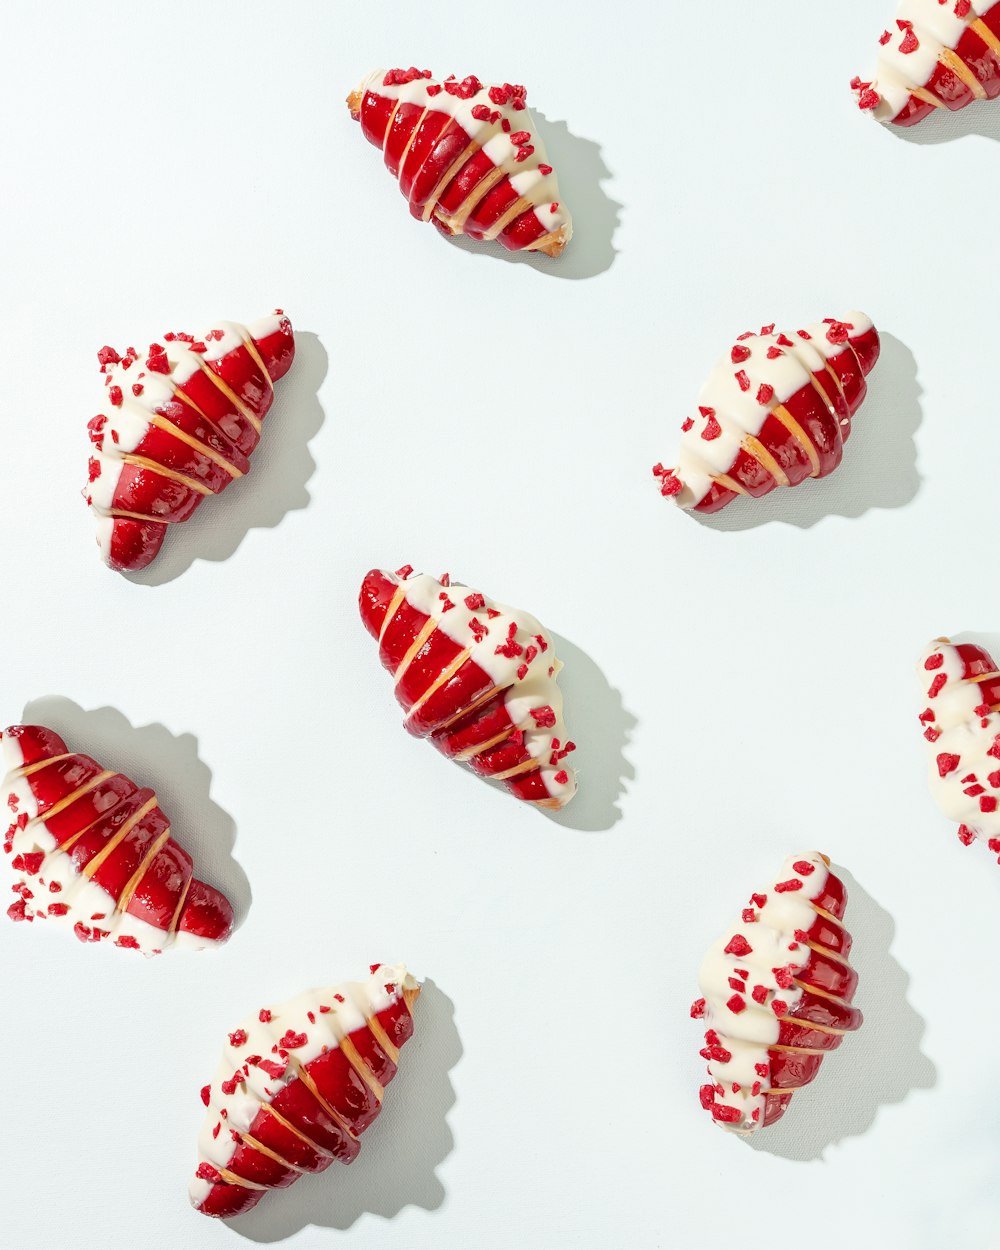 a group of red and white pastries on a white surface